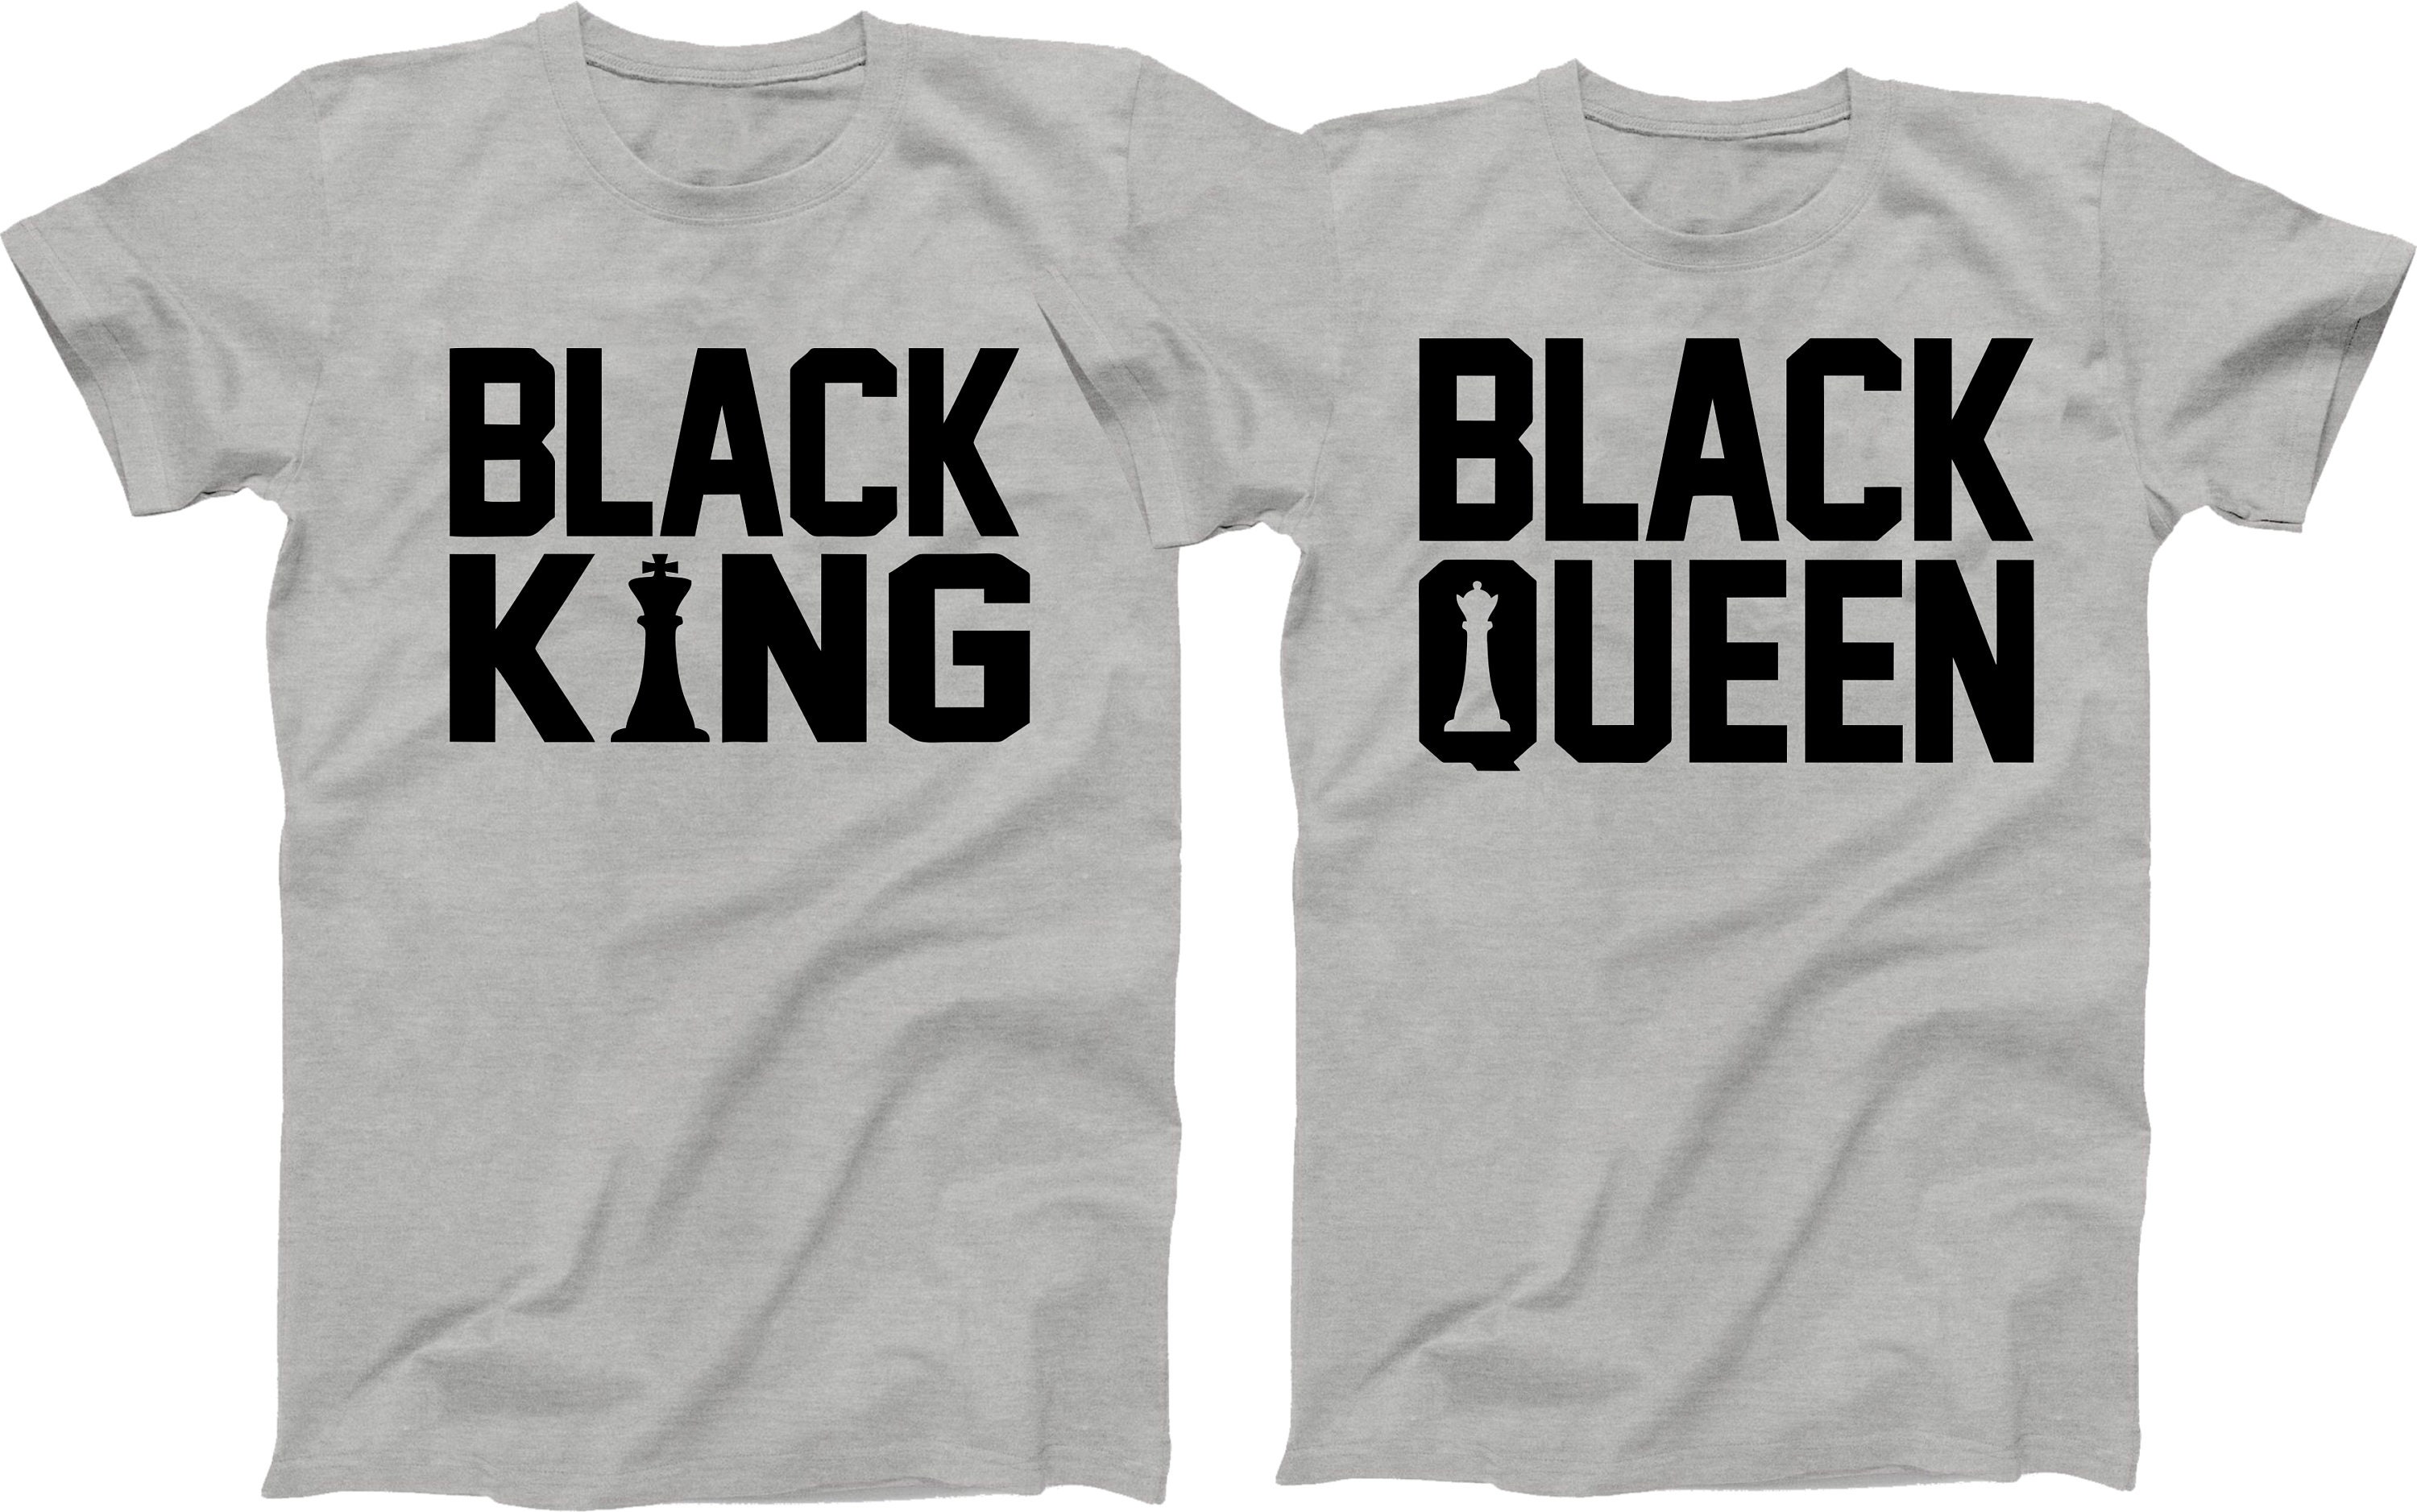 Black King and Black Queen Shirt Matching T Shirts for Couples - Etsy